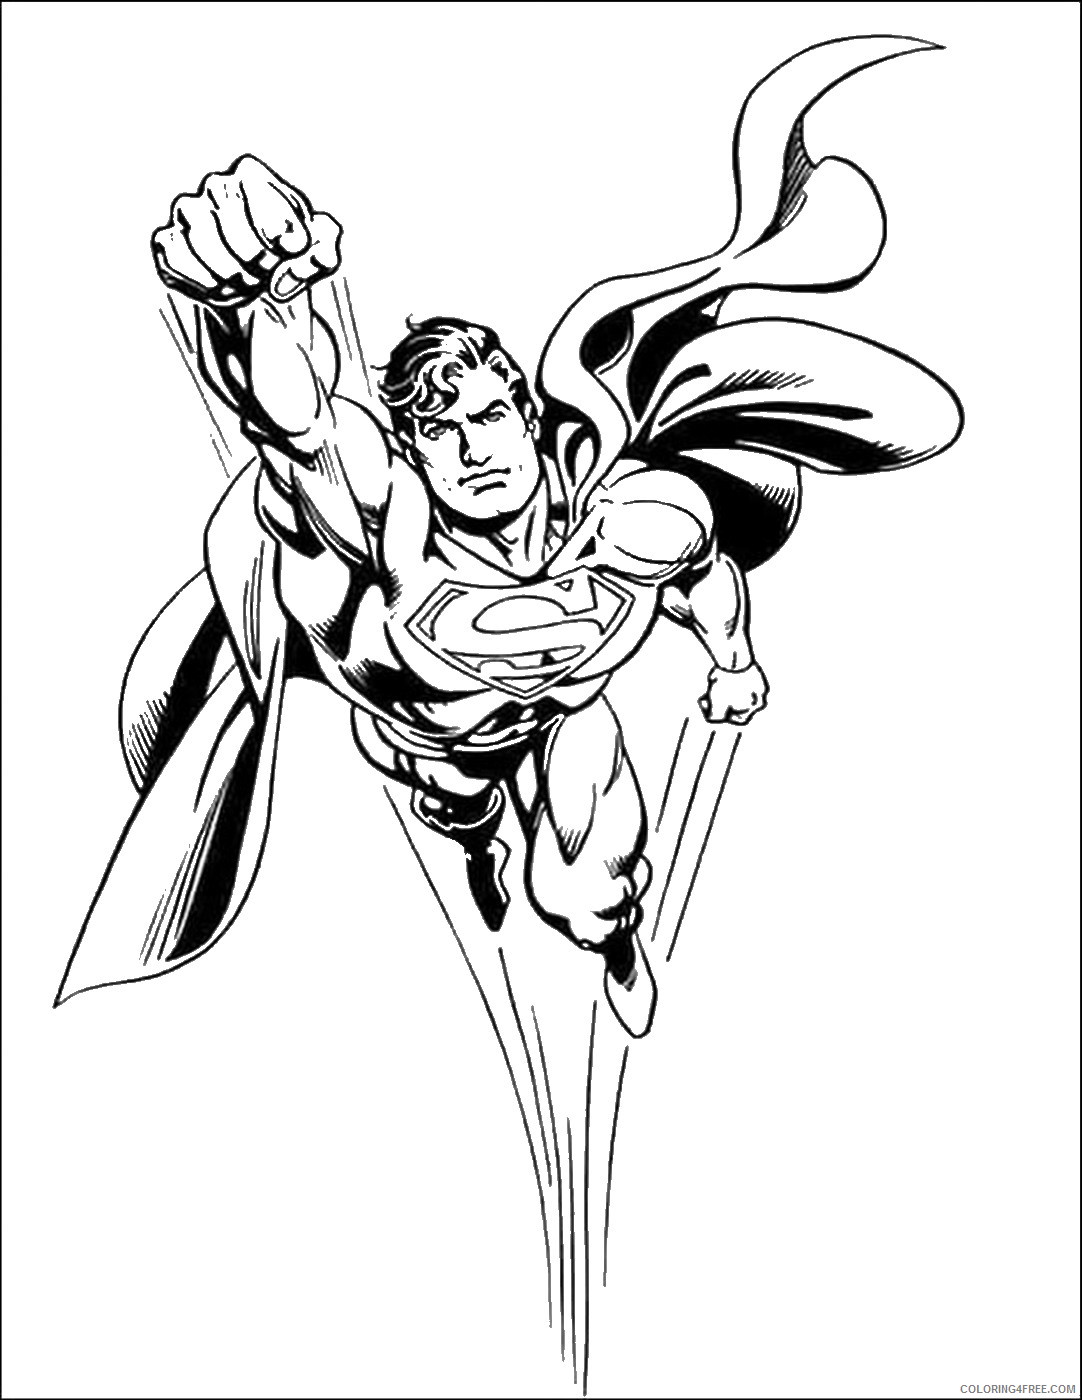 Superman Coloring Pages Superheroes Printable 2020 Coloring4free